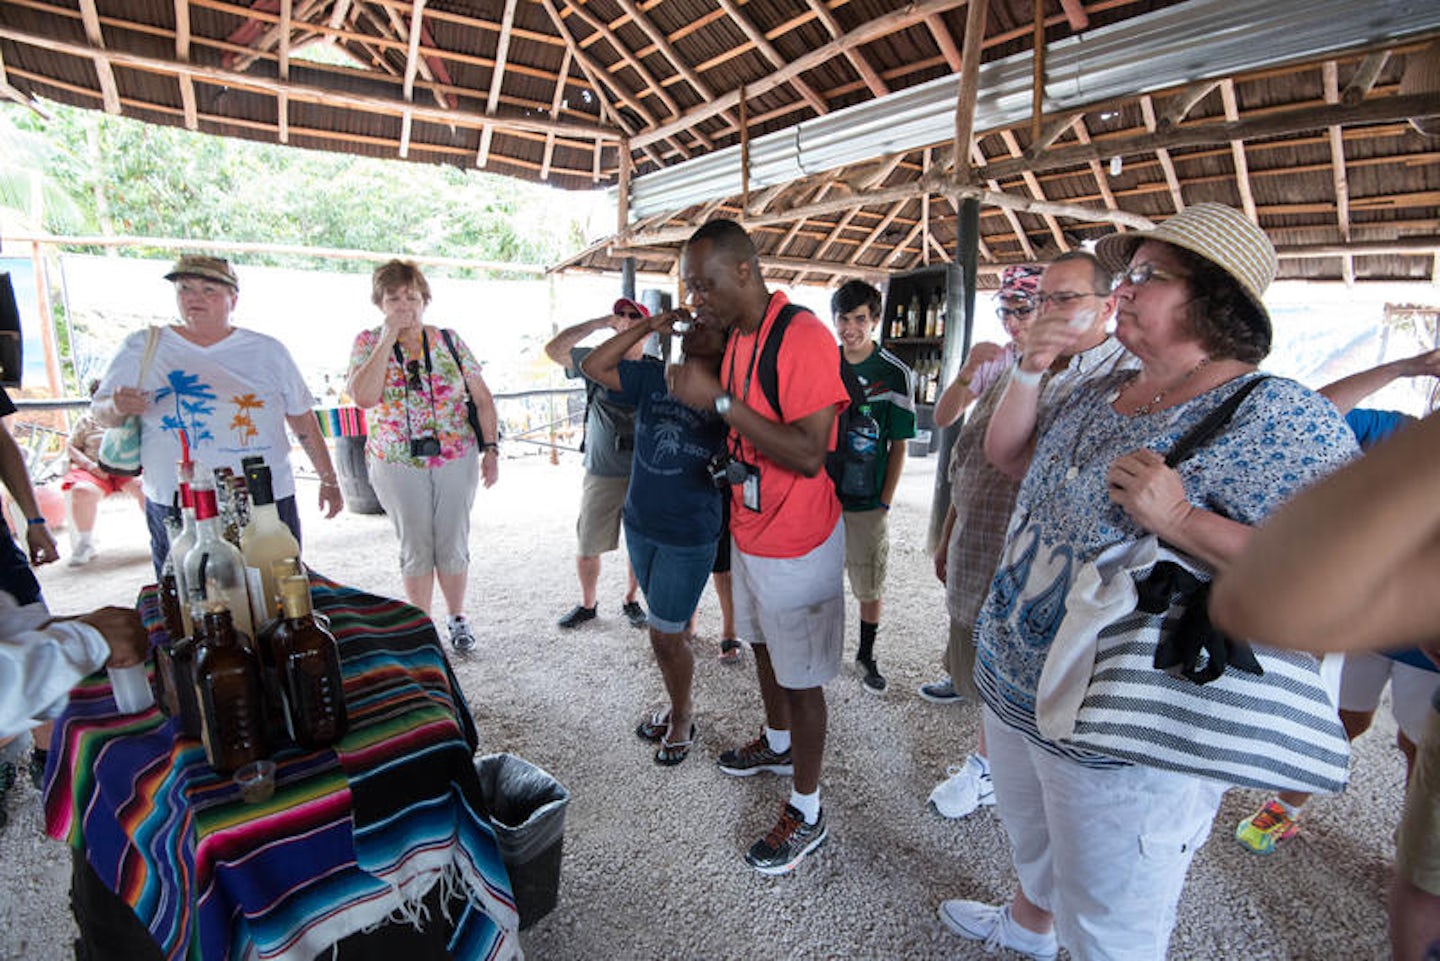 Cozumel Excursion - Living History Mayan Traditions and Island Tour at Cozumel Port